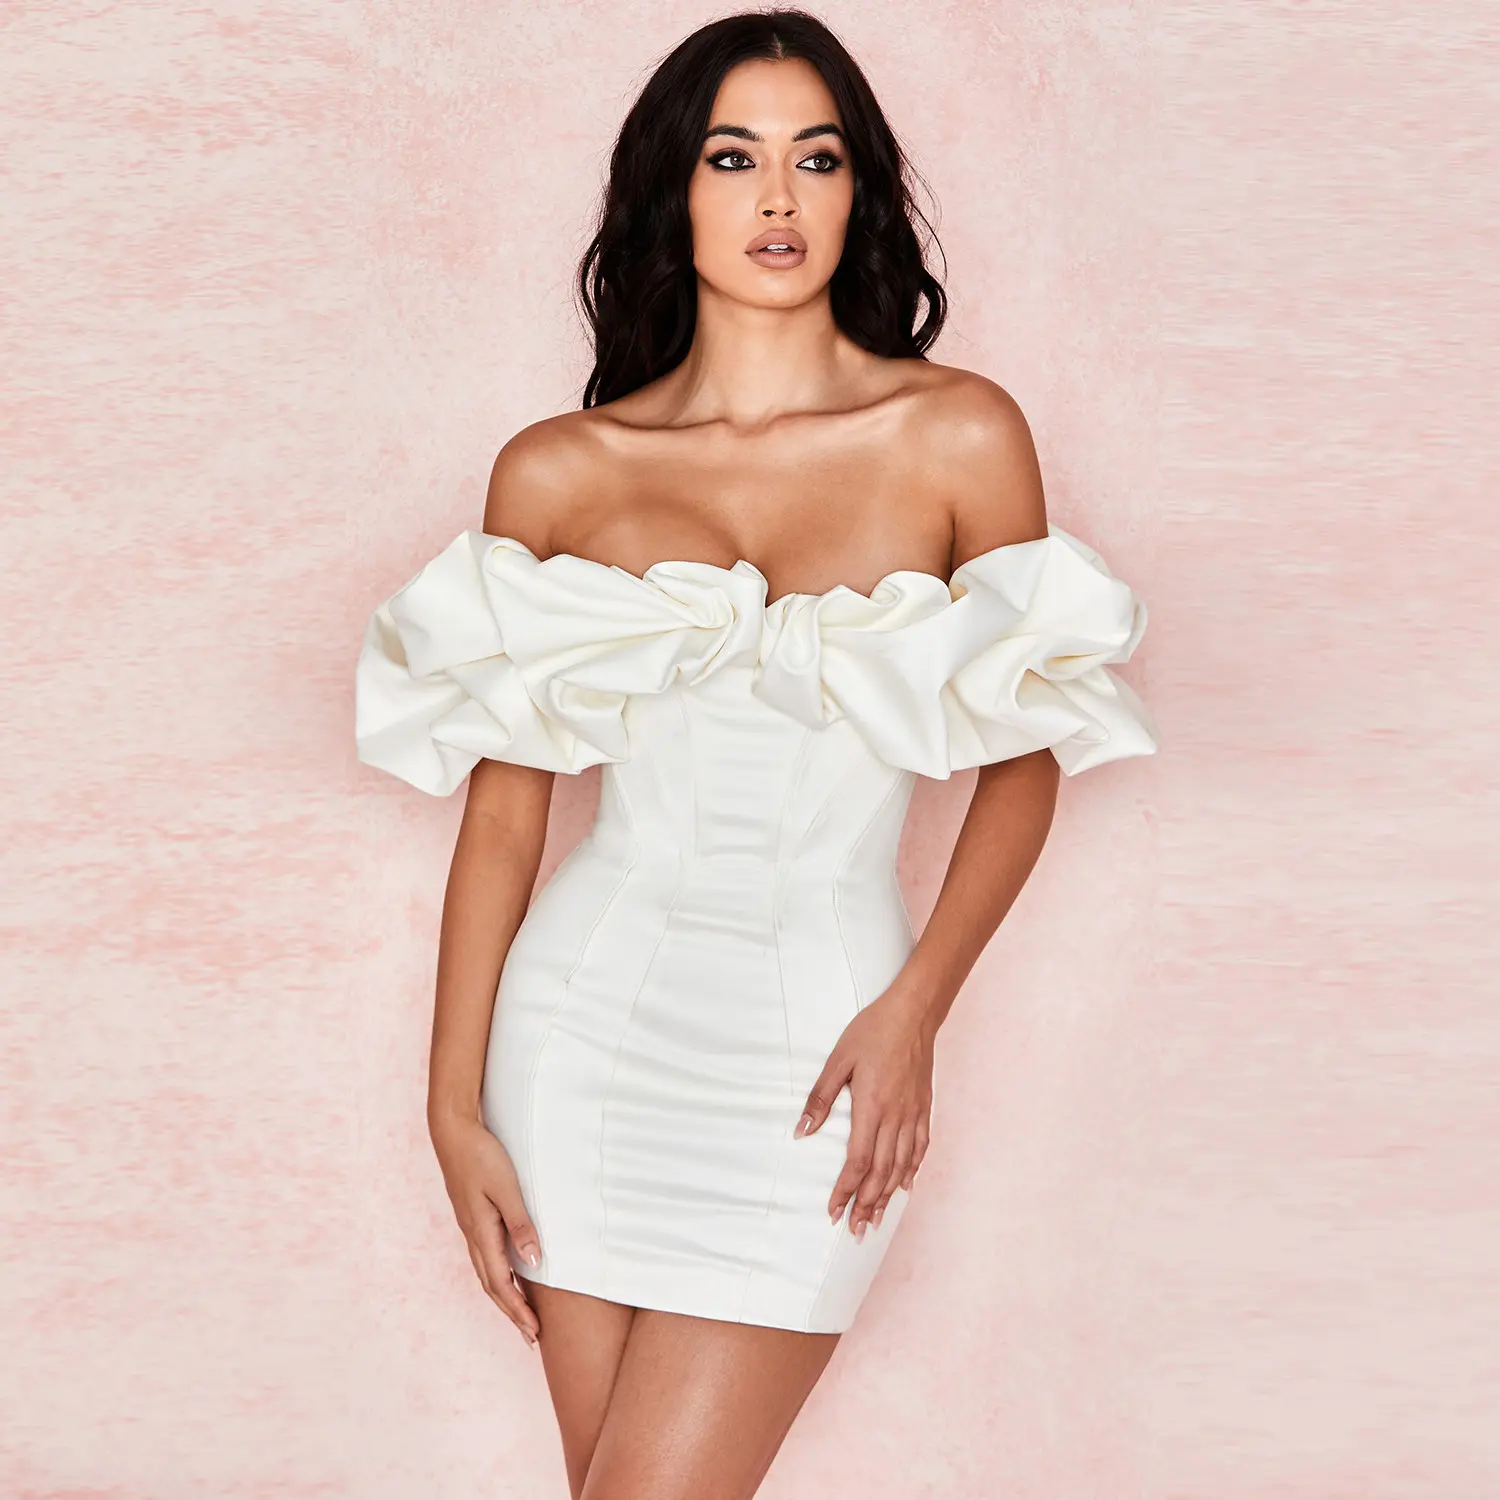 Ruffle off shoulder tube top halter dress ladies white sexy club party gown